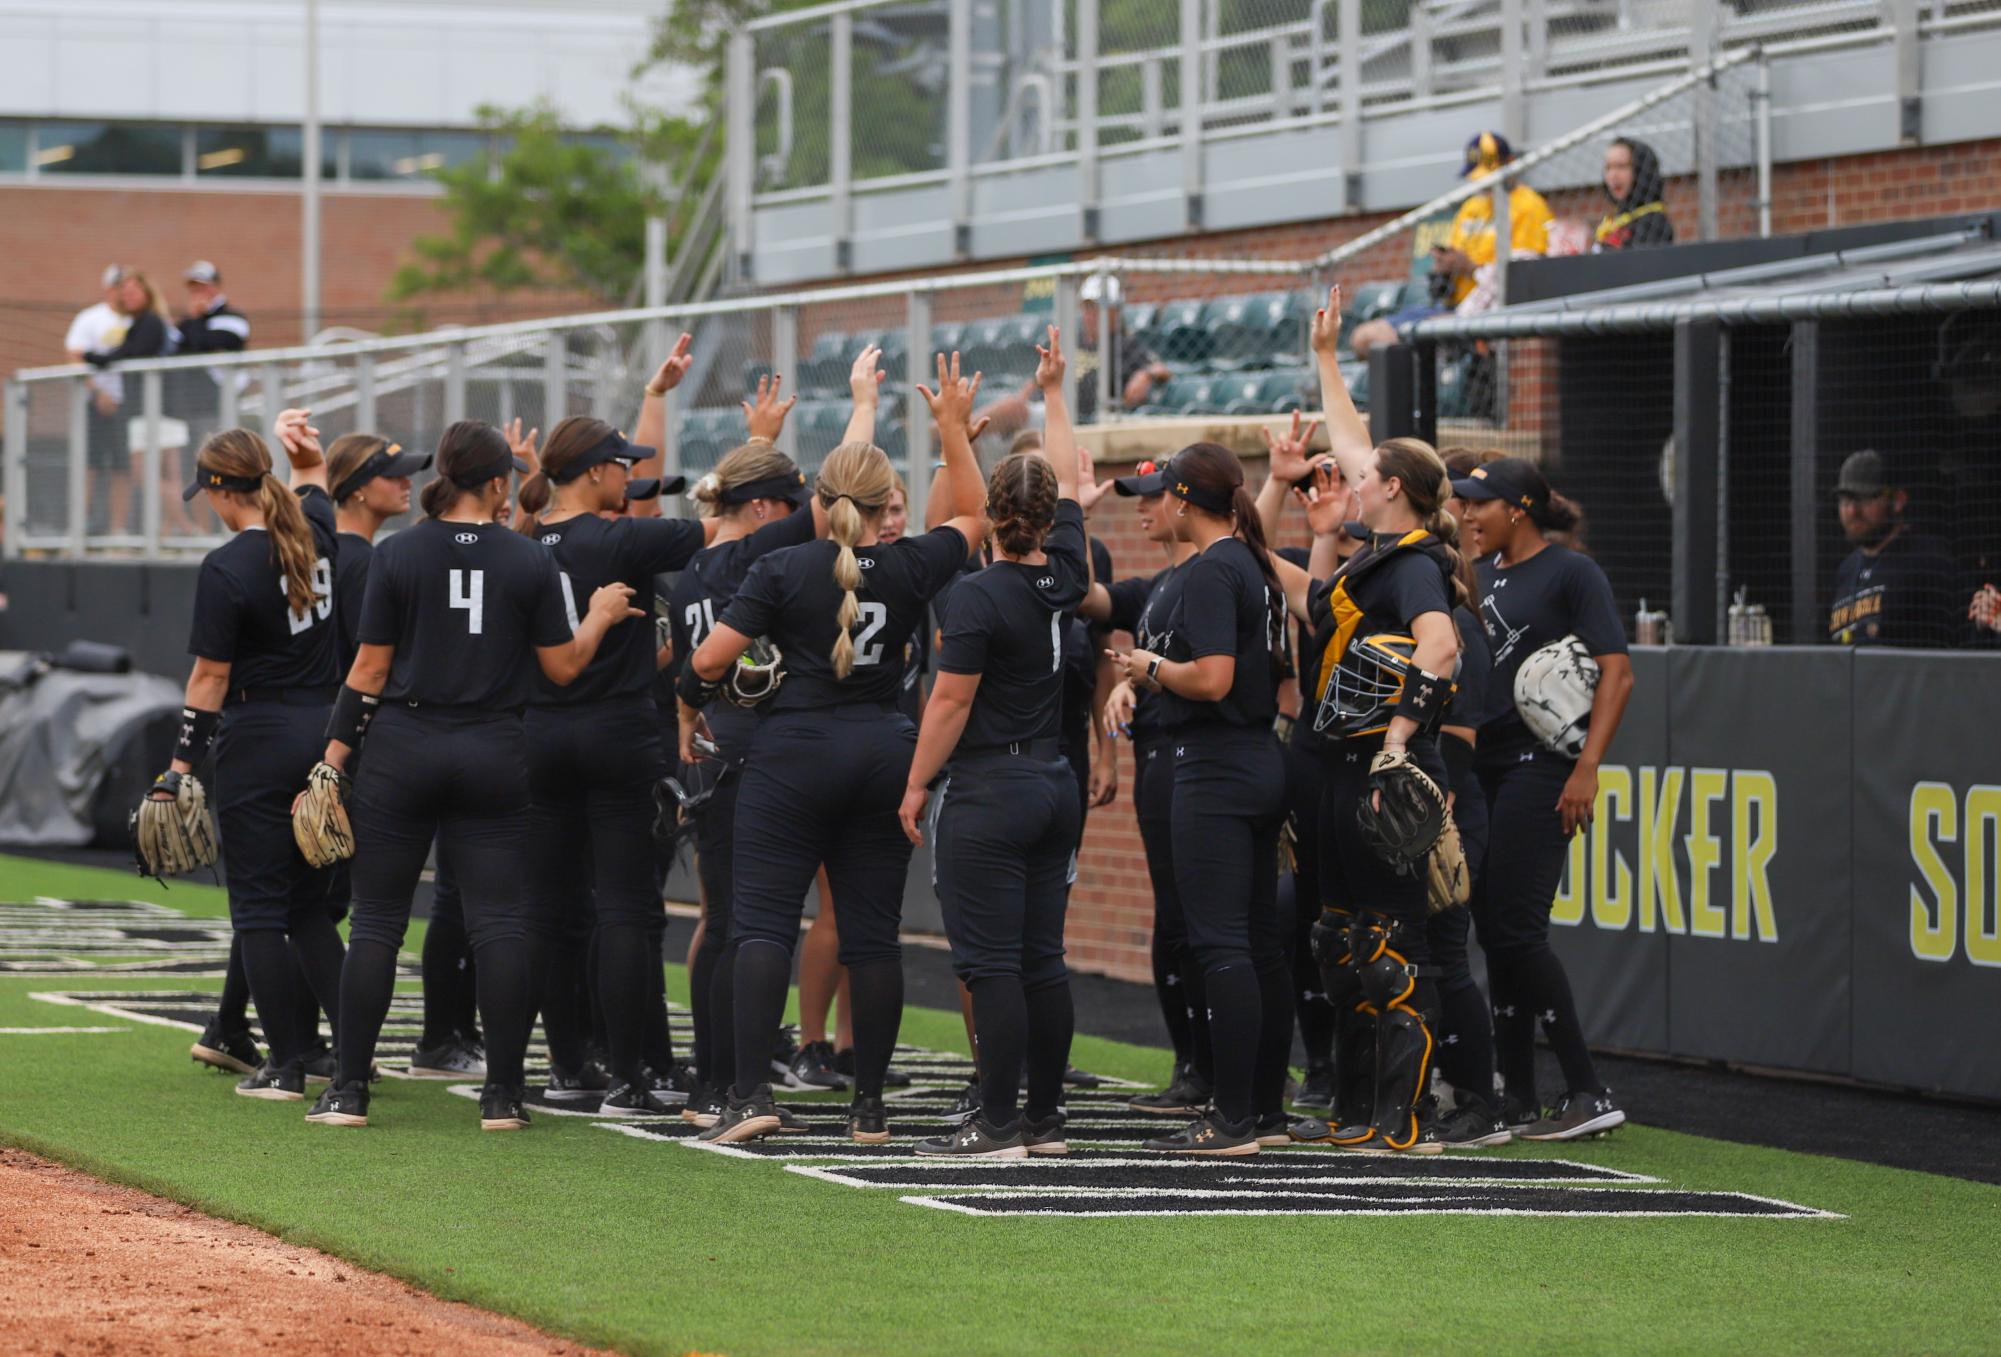 The Wichita State softball team gathers together before the match against McLennan Community College on Sept. 16.